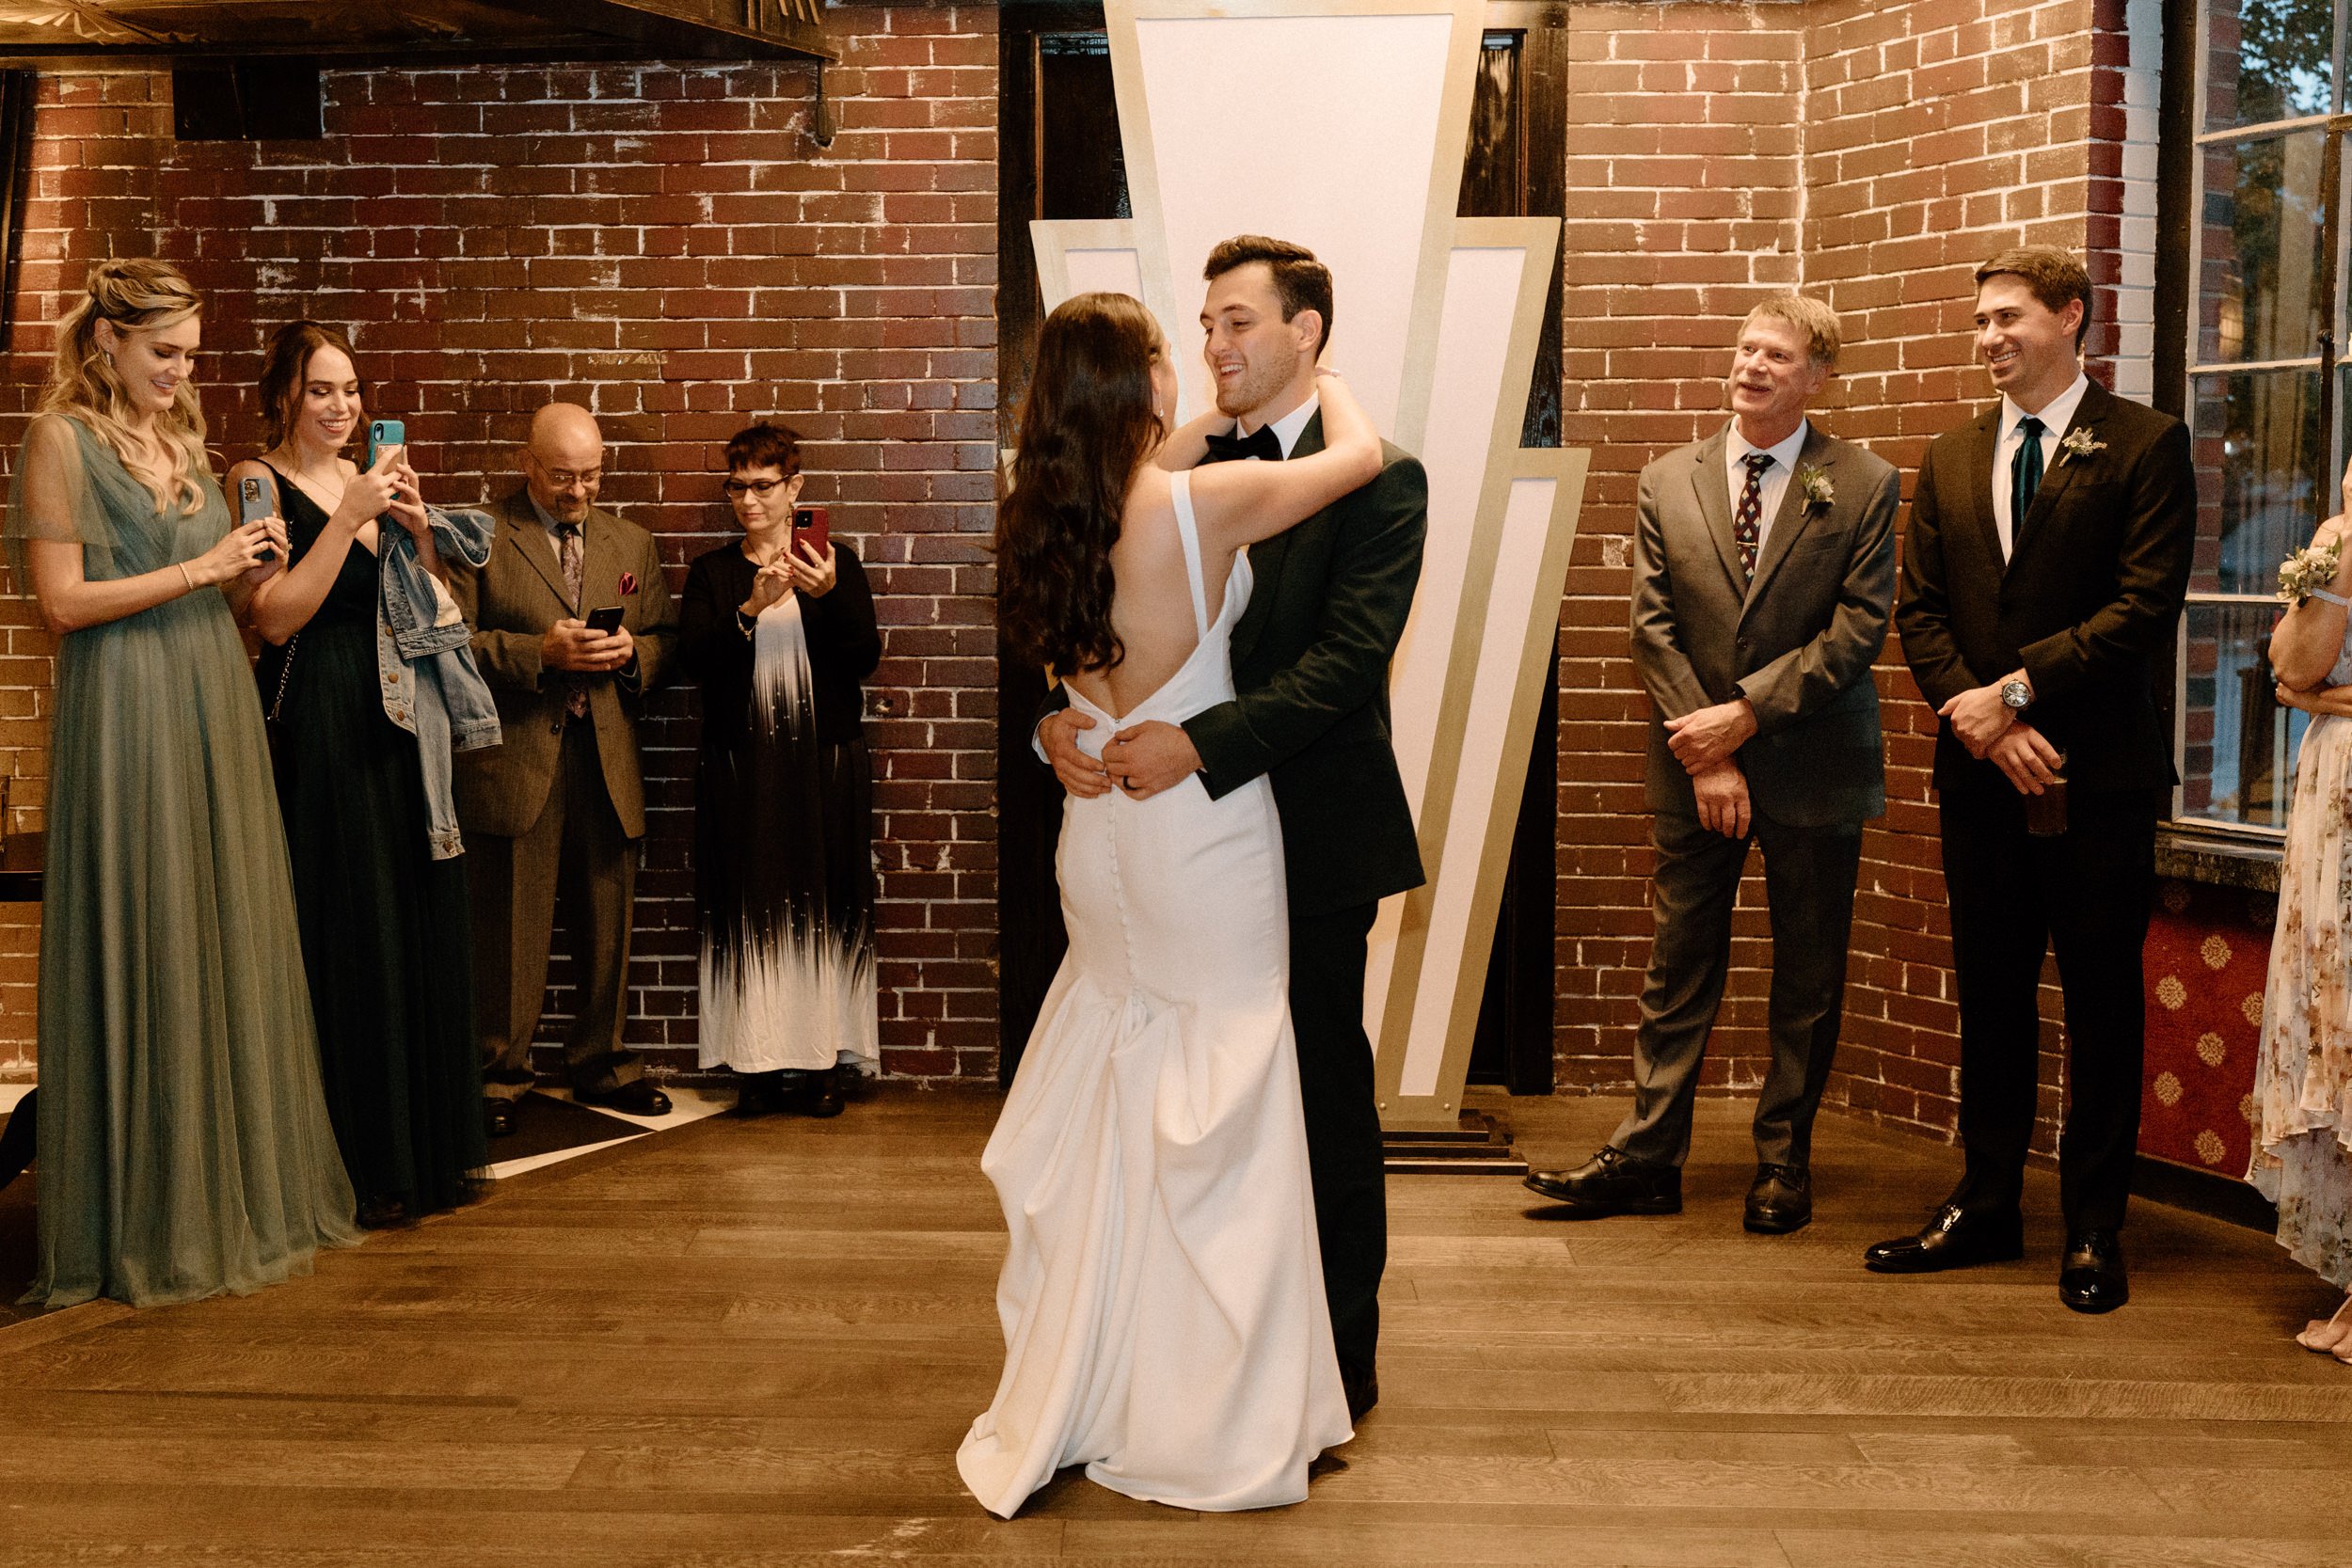 The bride and groom smile at each other as they share their first dance